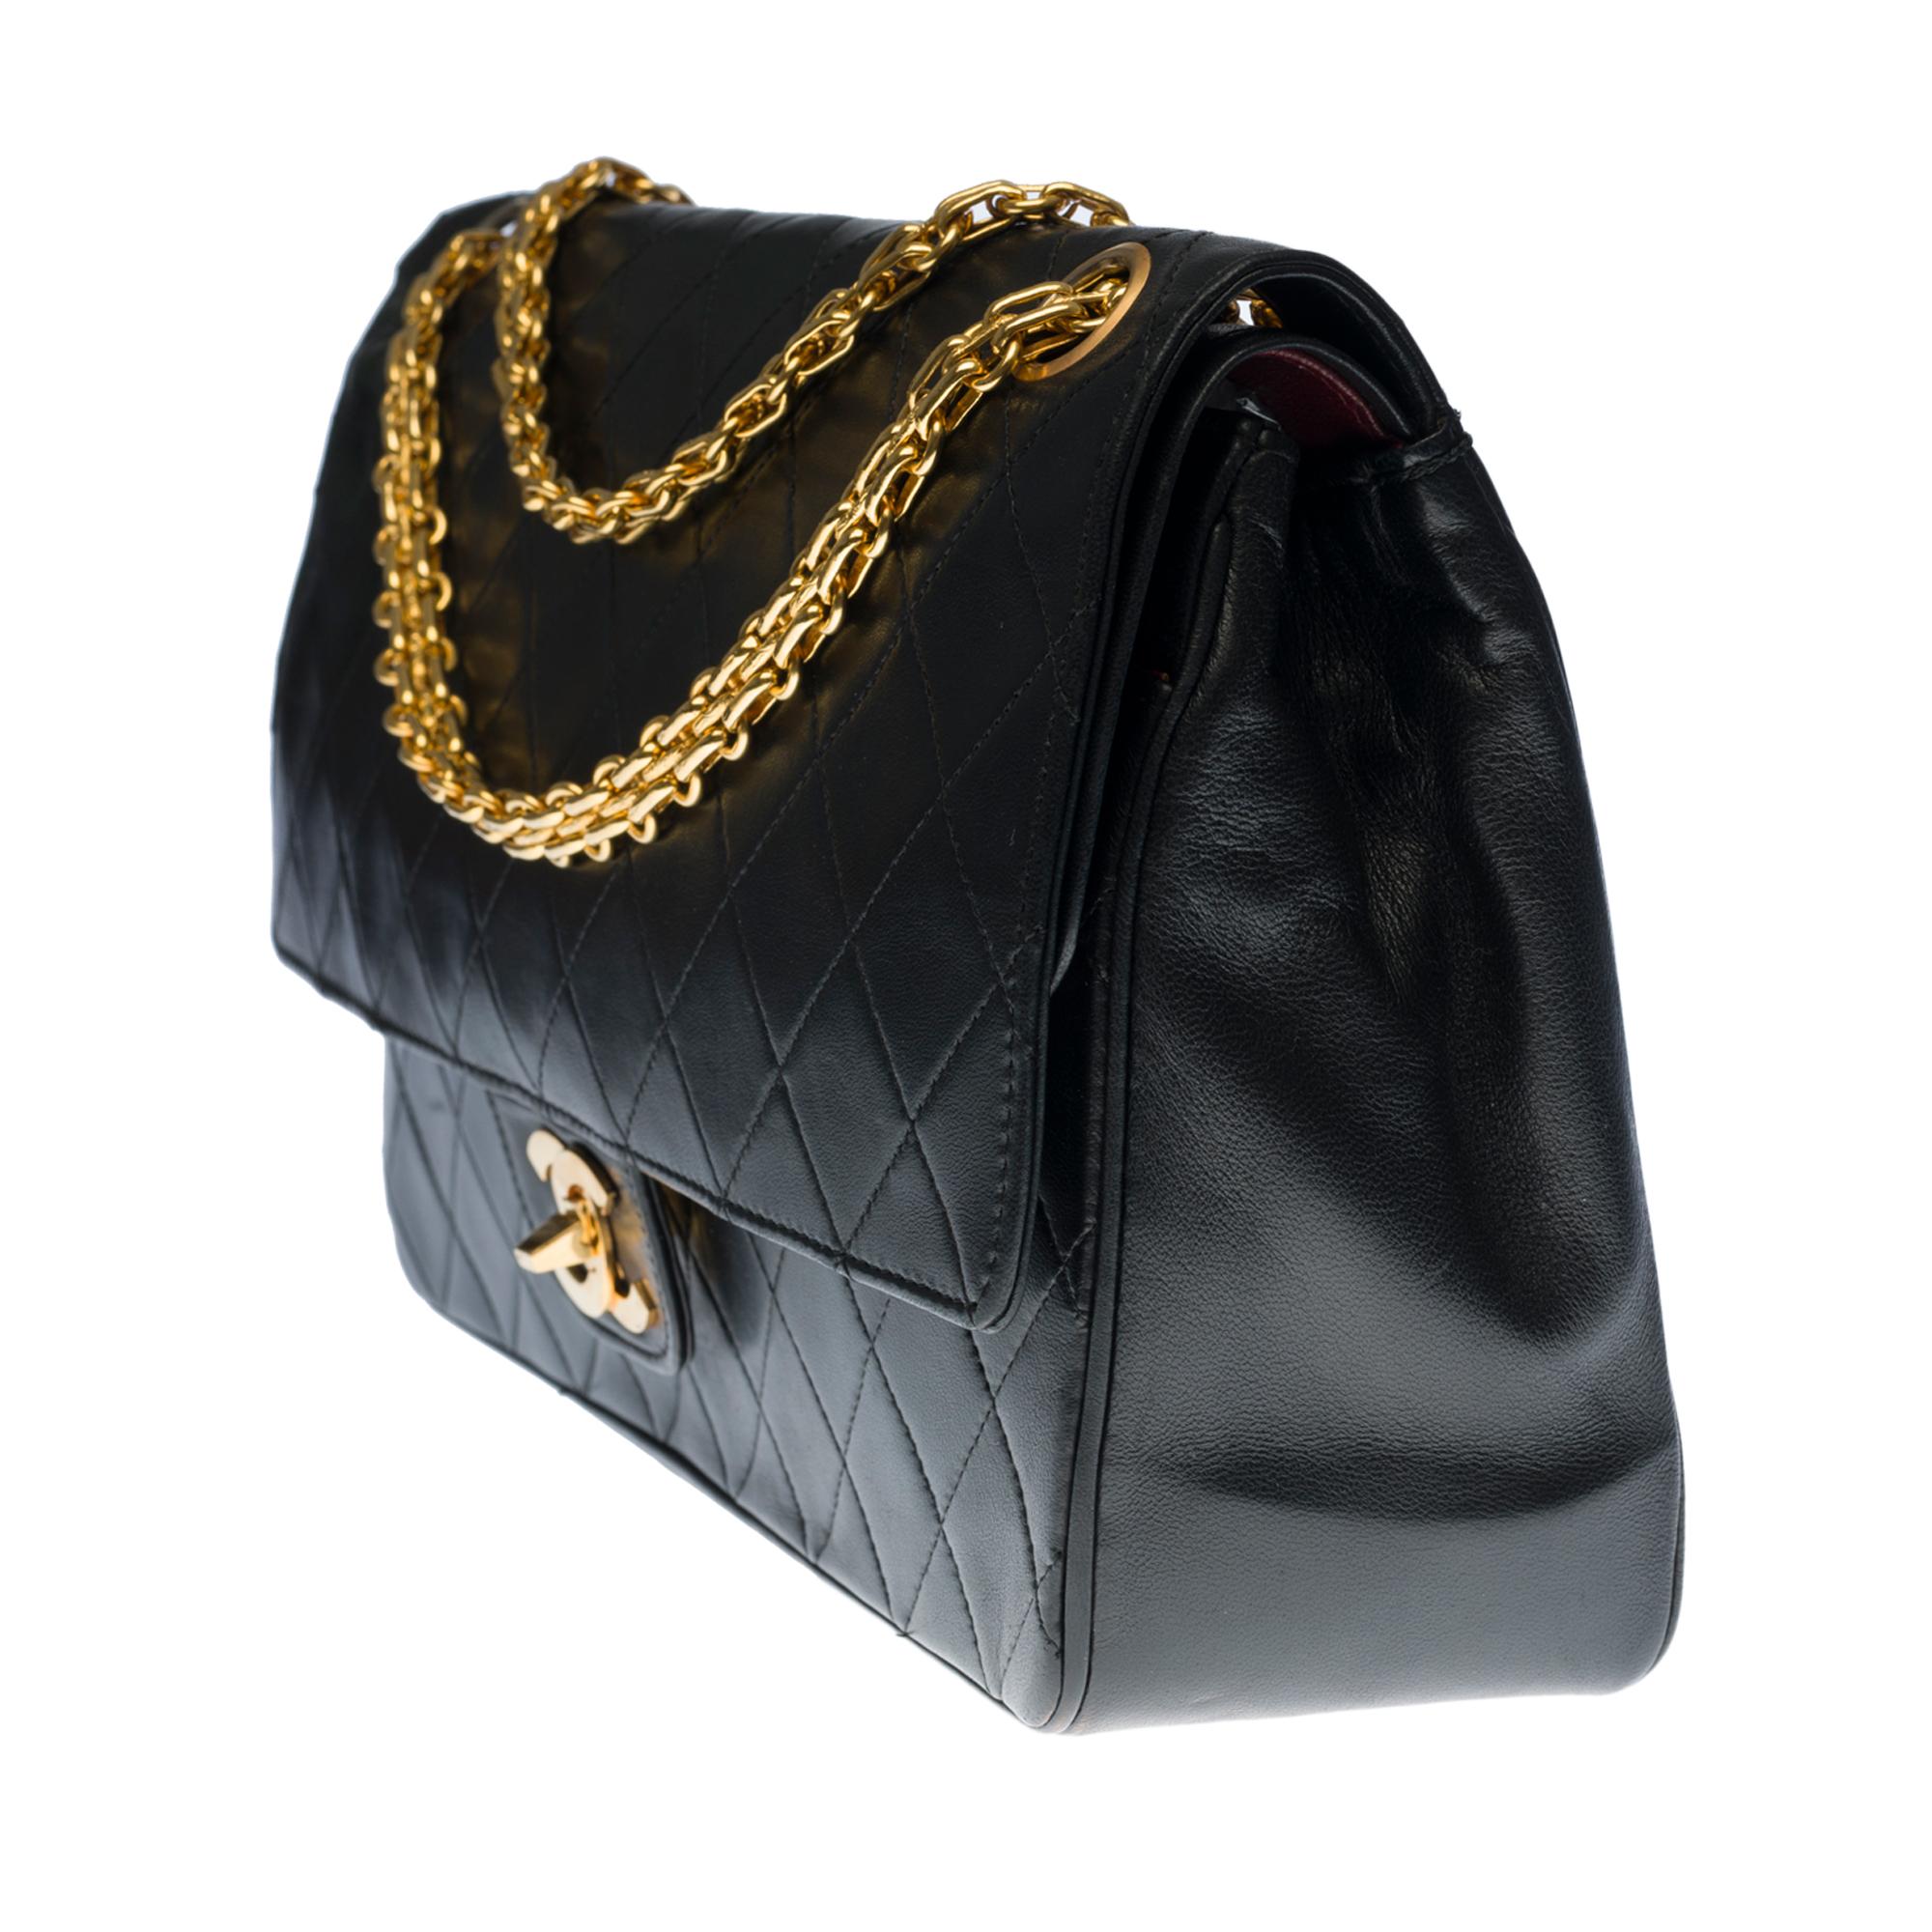 Black Chanel Timeless/Classic double Flap shoulder bag in black quilted lambskin, GHW